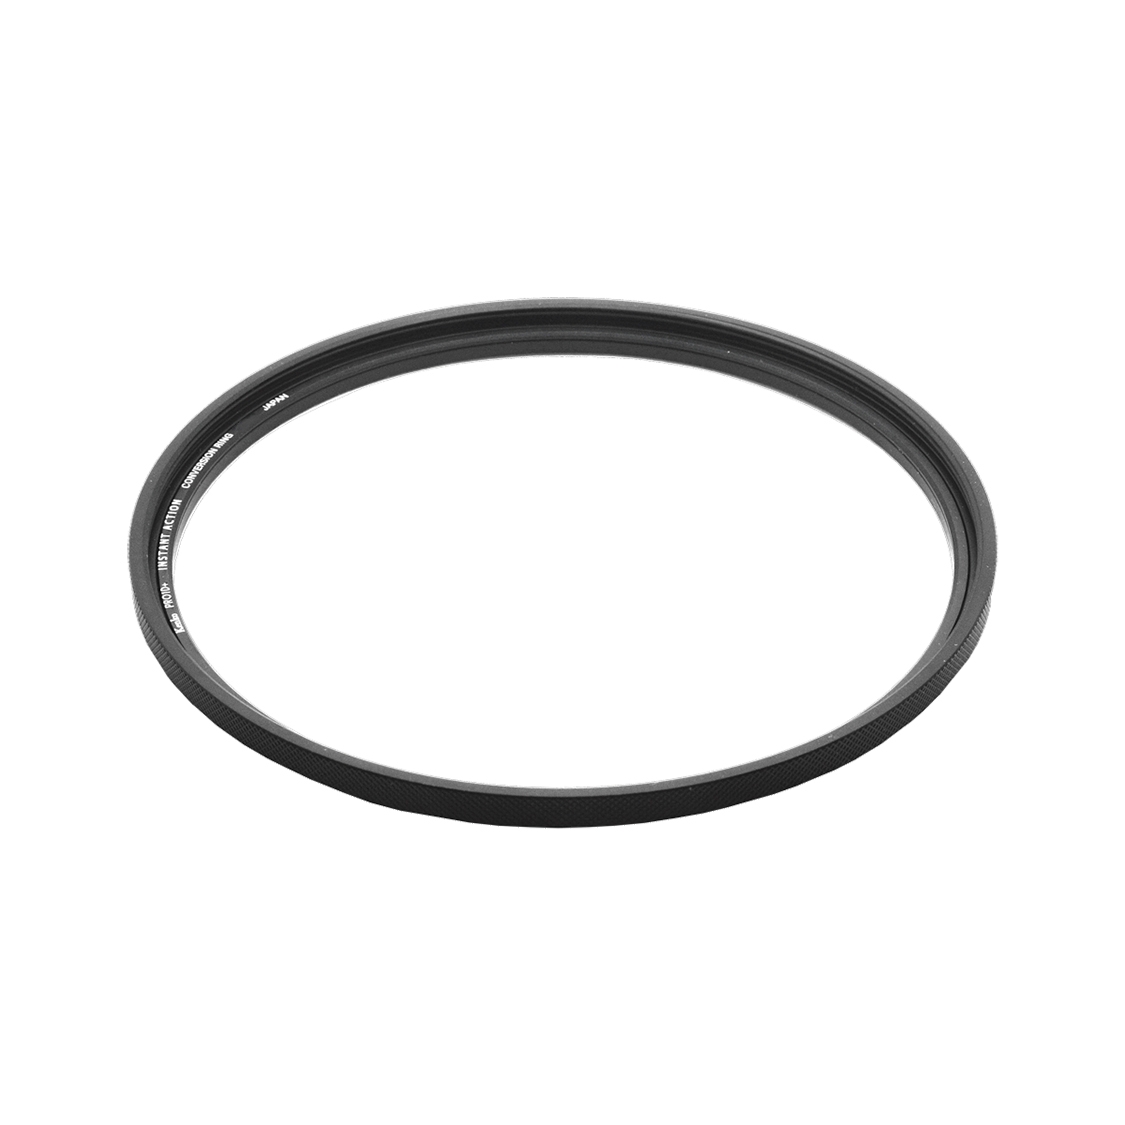 Kenko Instant Action Pro1D+ Conversion Ring (62mm)